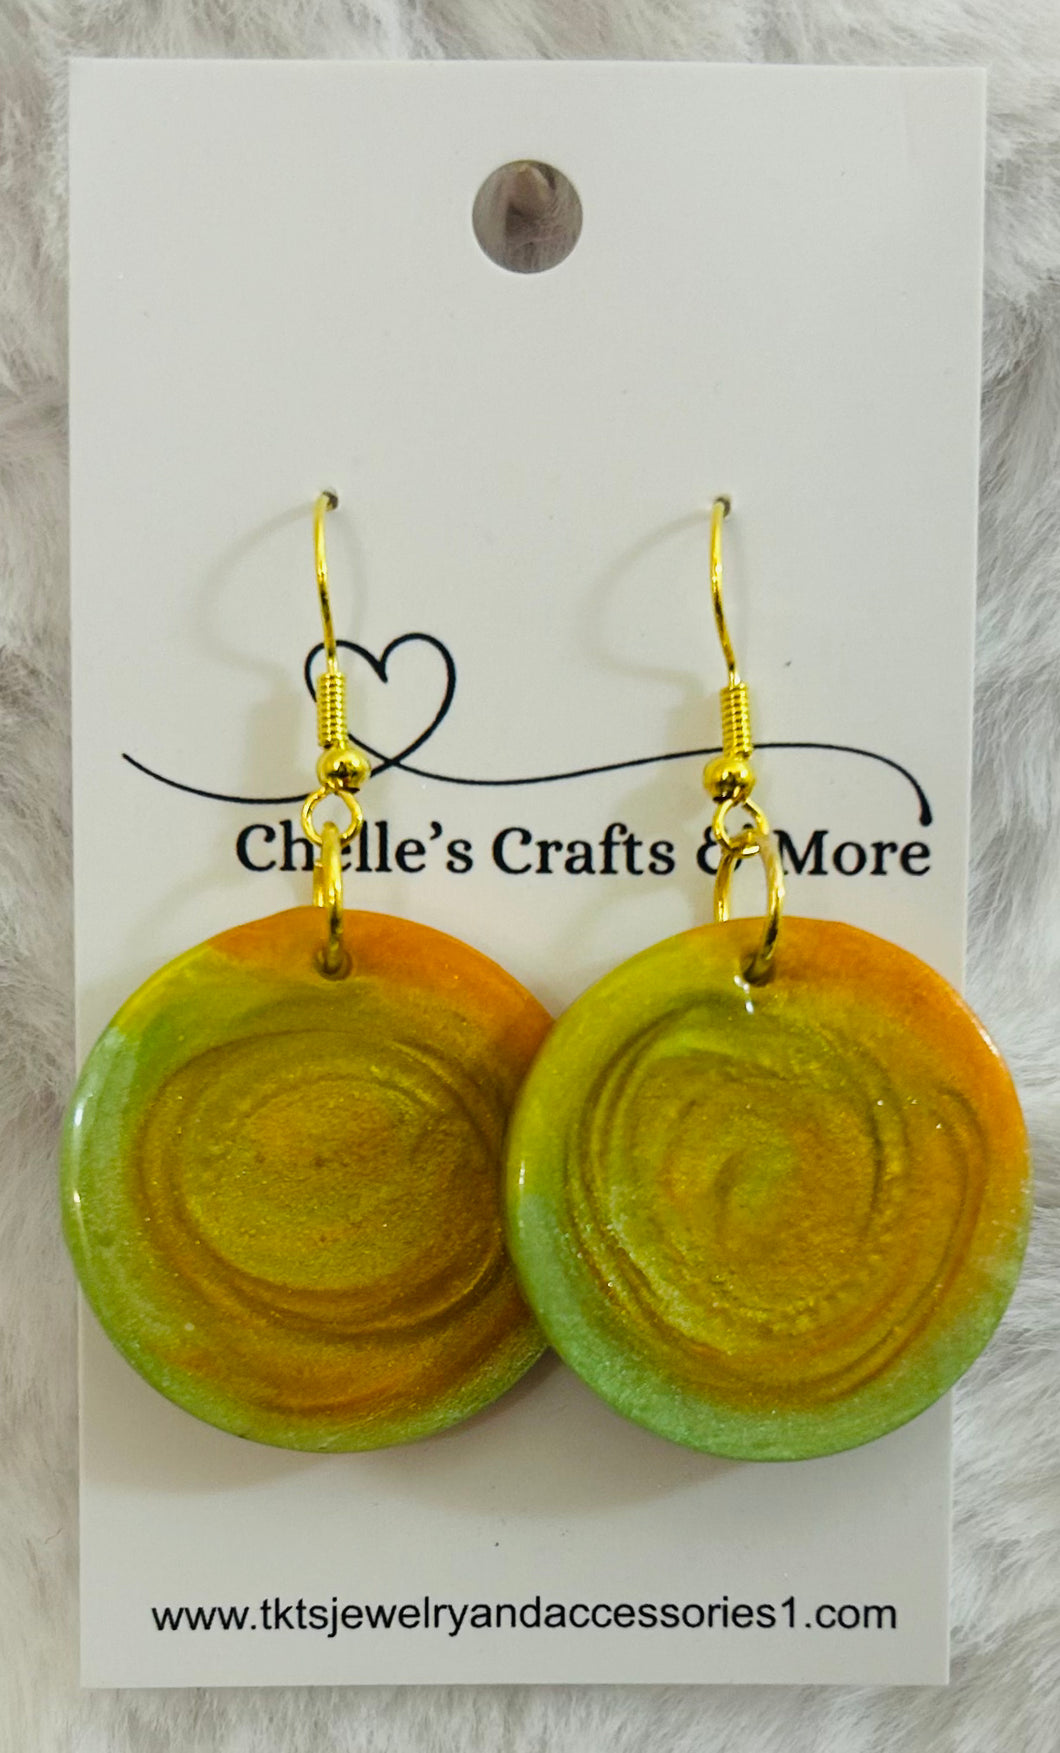 Chelle’s Crafts & More 173